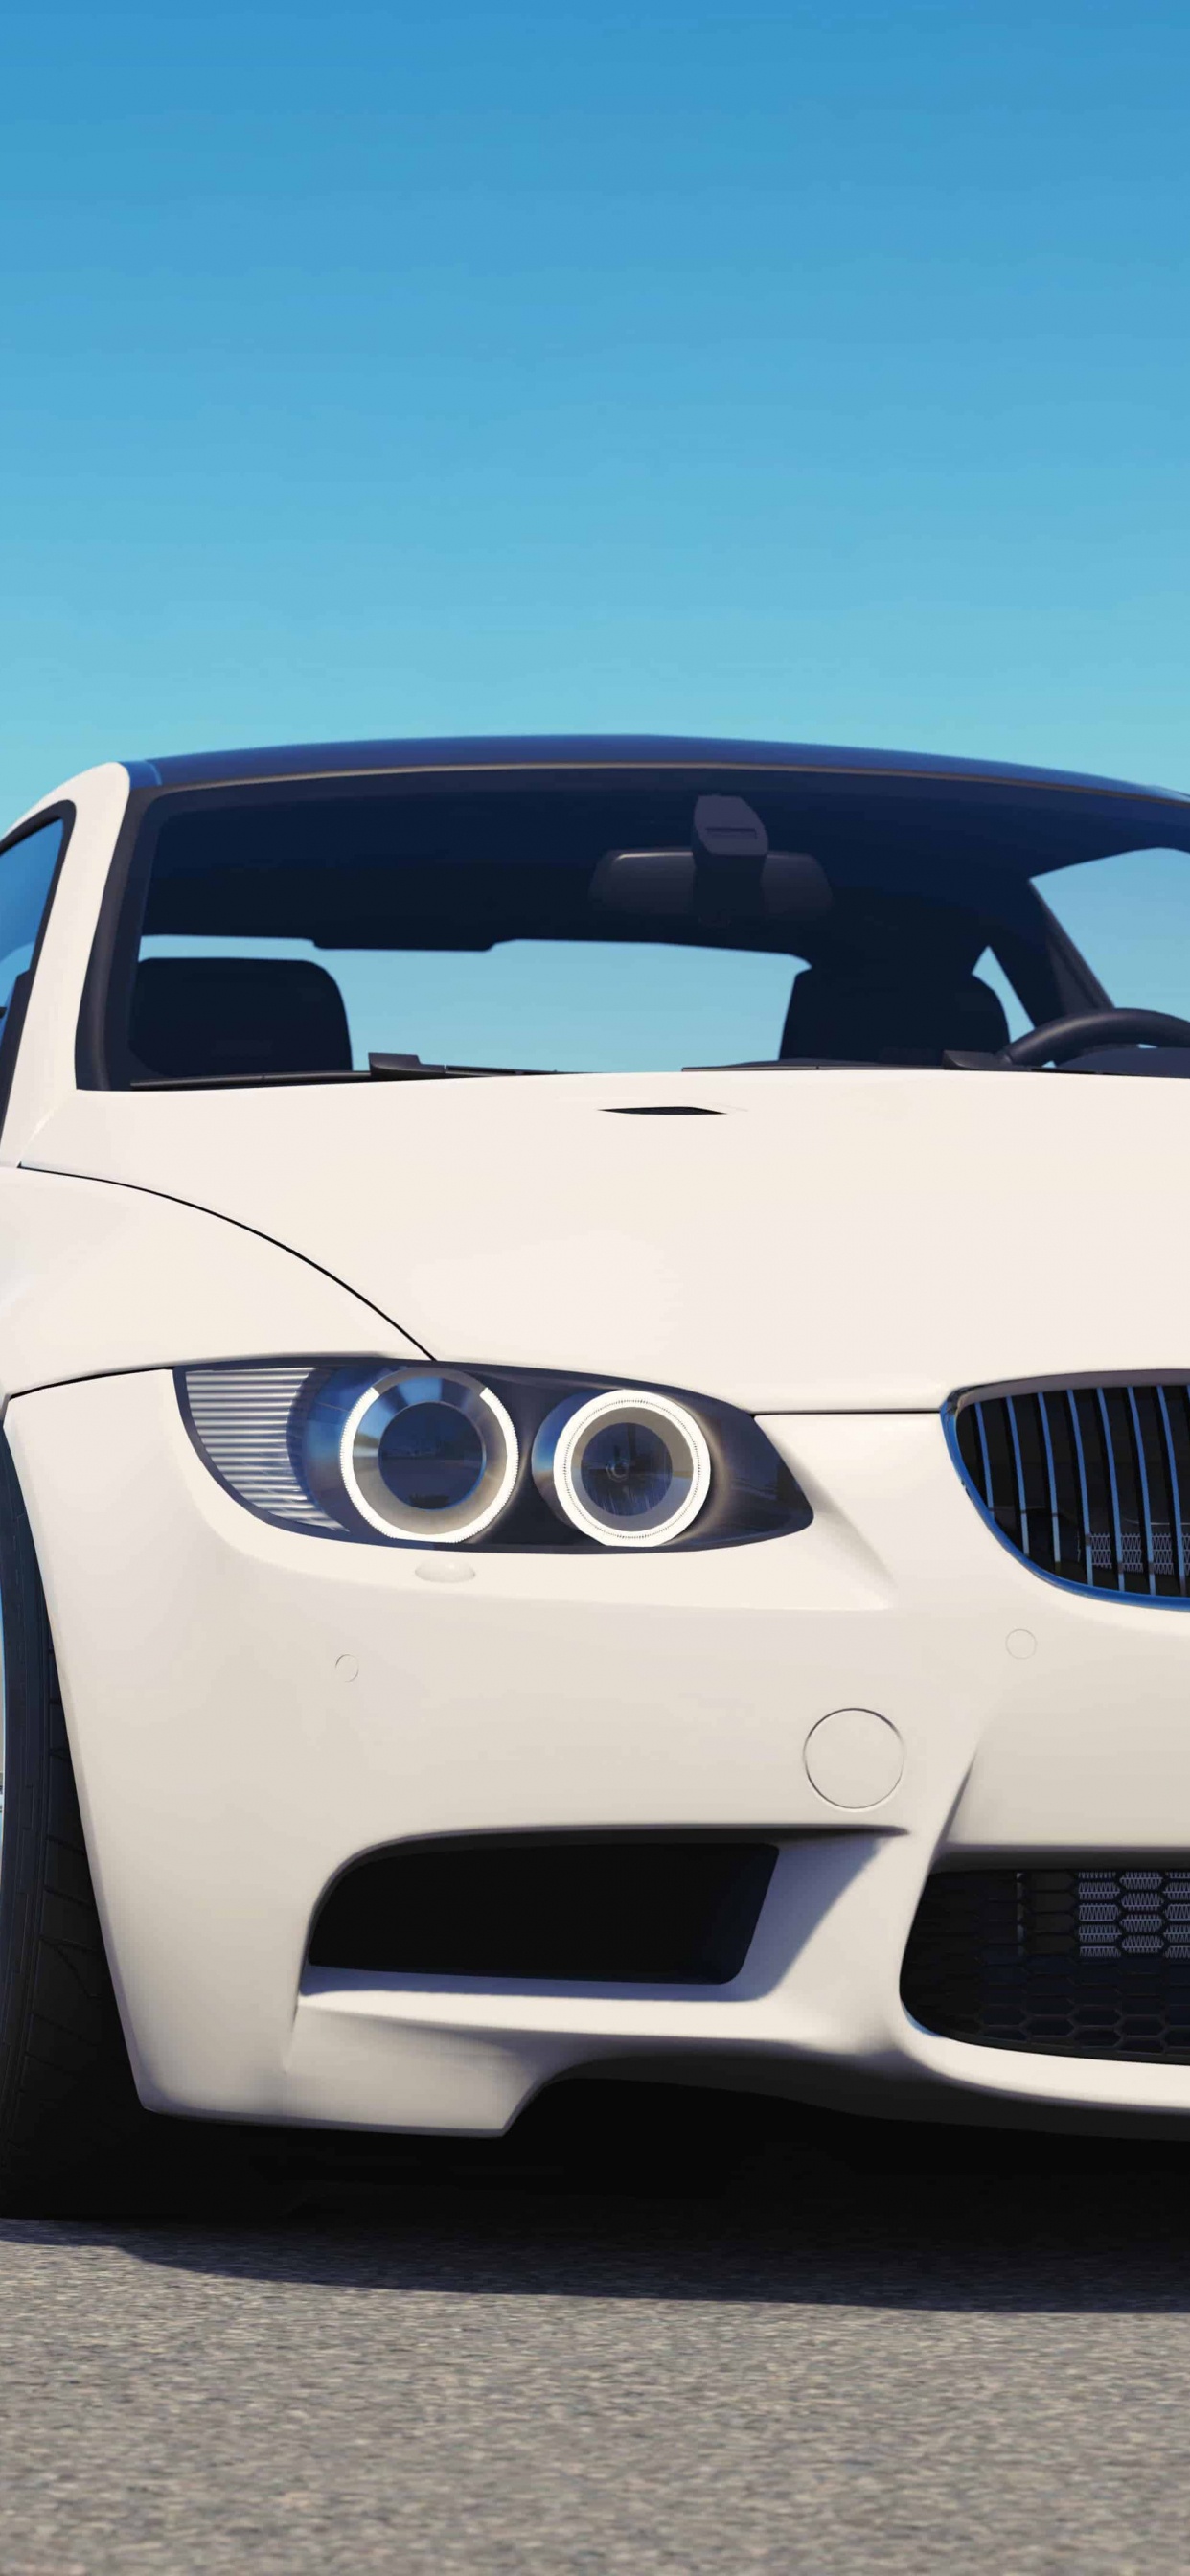 White Bmw m 3 Coupe Parked on Gray Asphalt Road During Daytime. Wallpaper in 1242x2688 Resolution